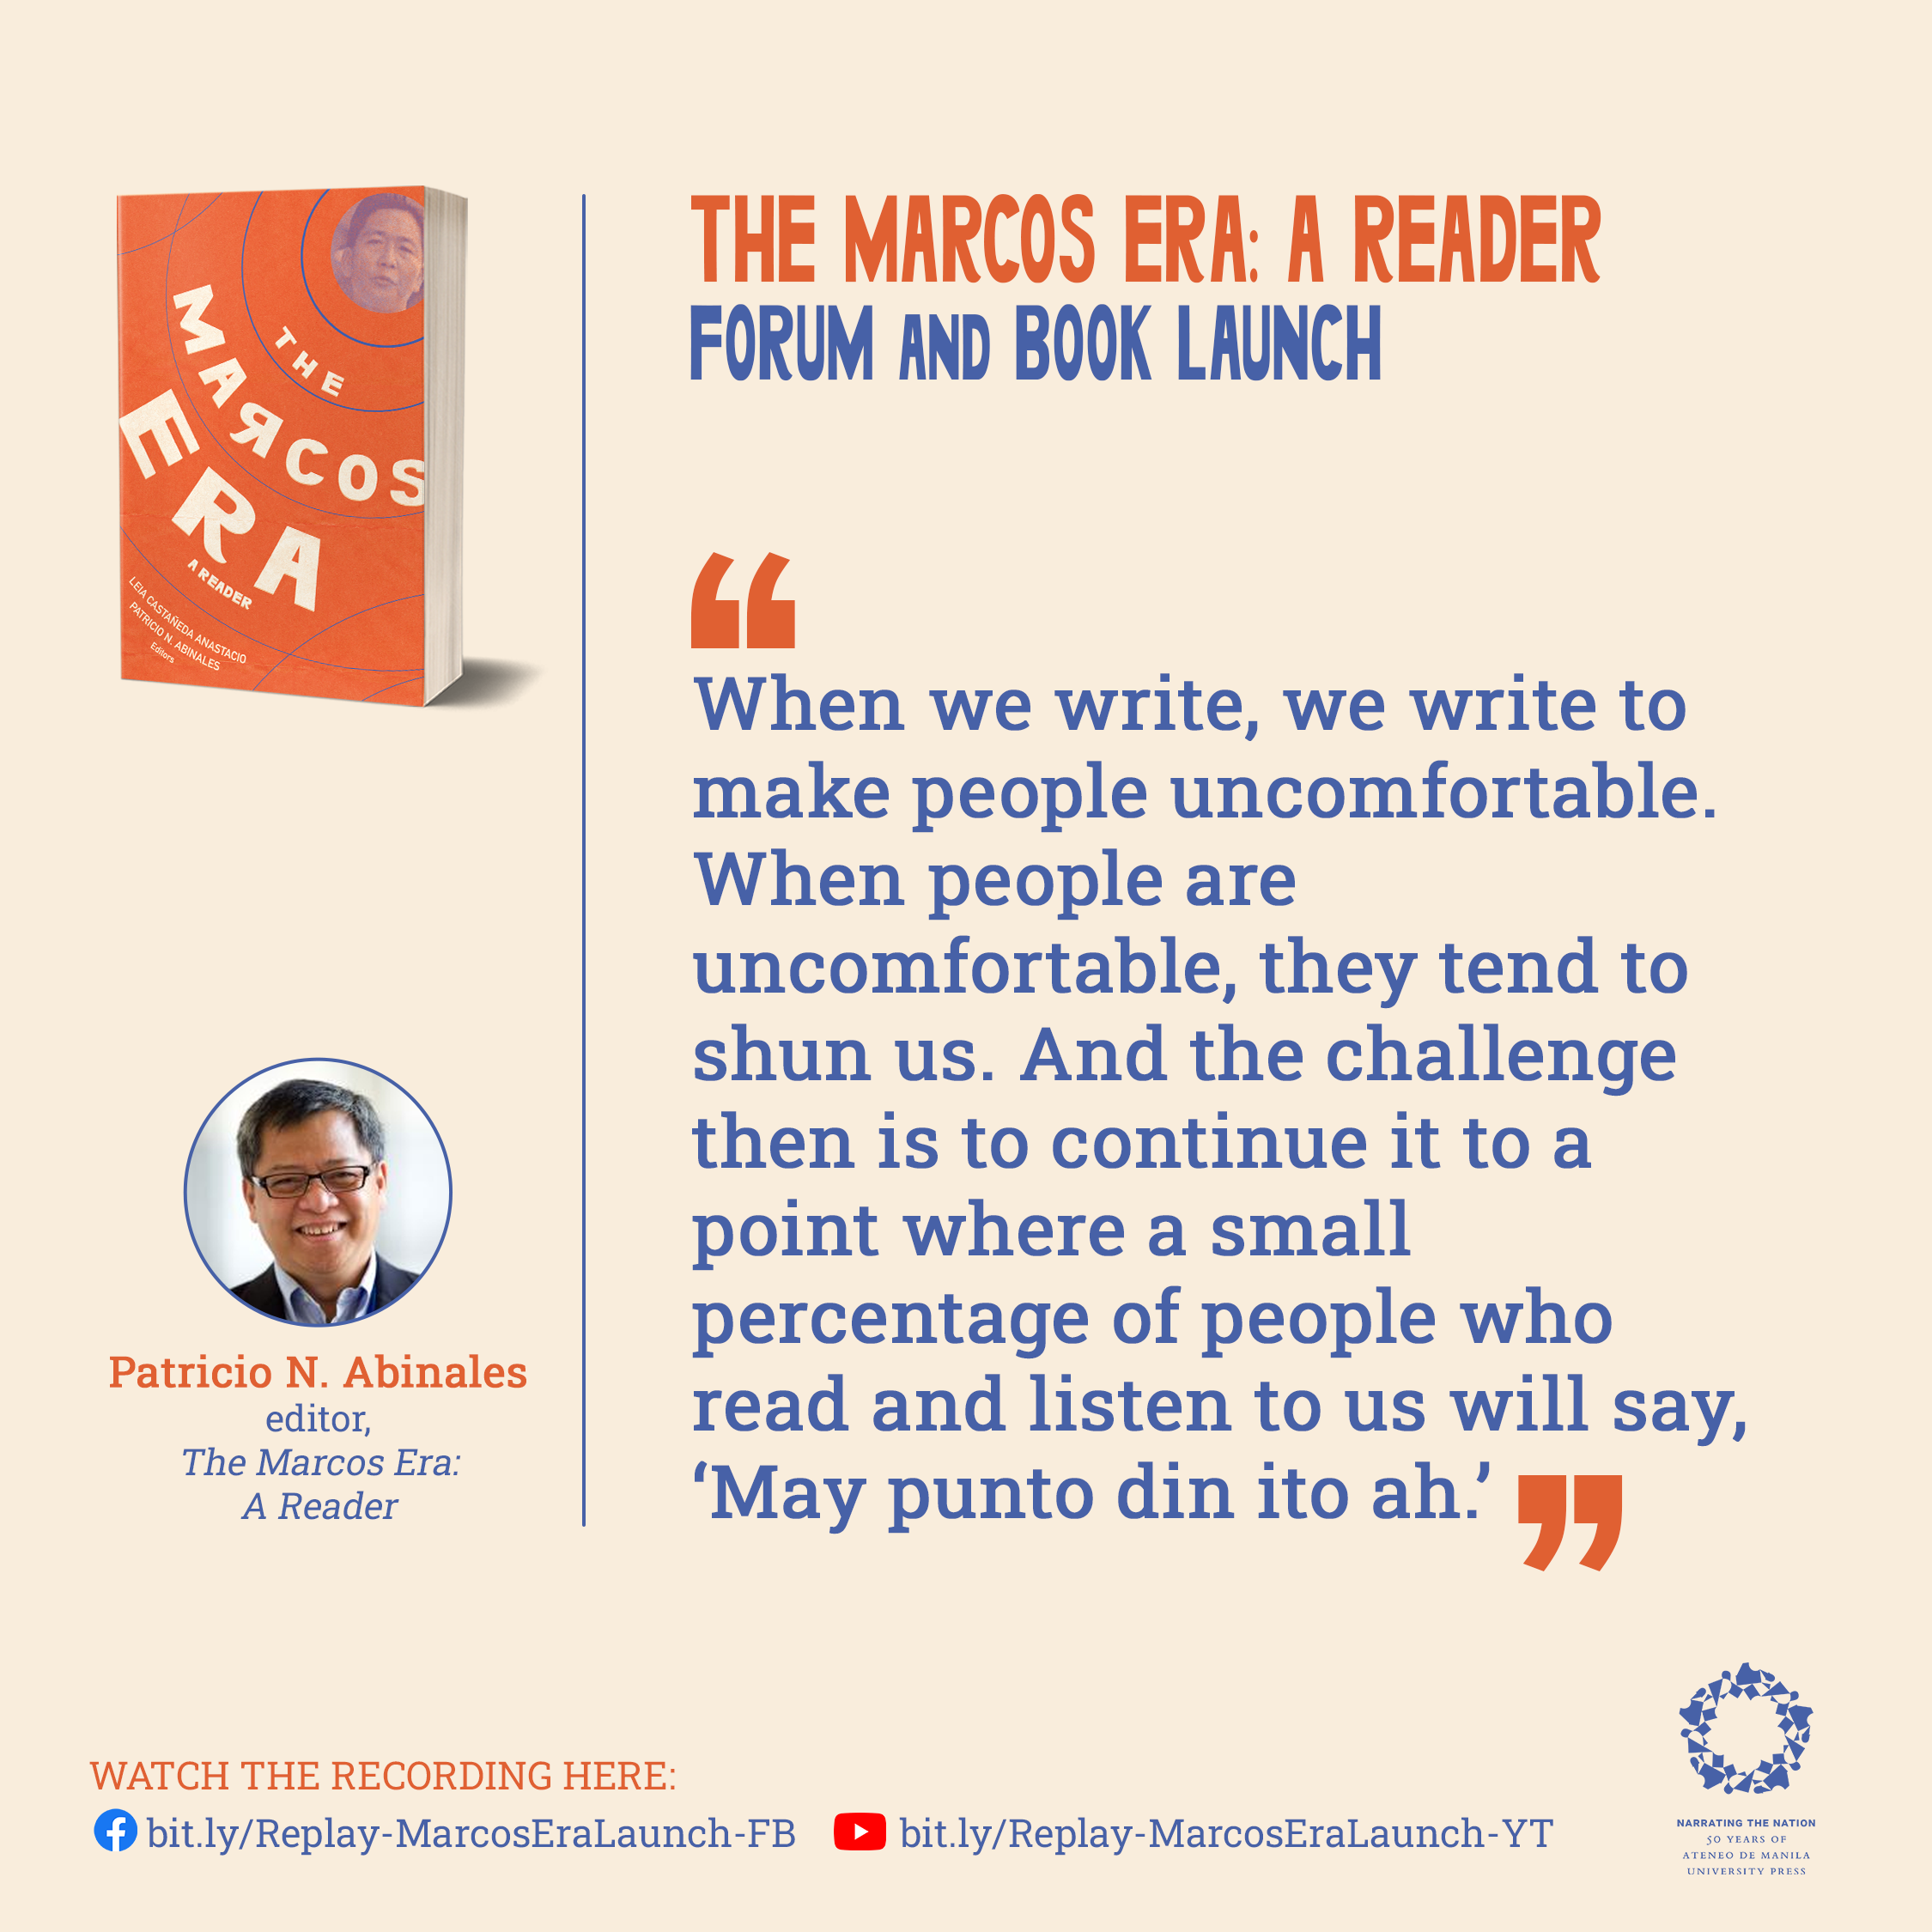 Editor Patricio Abinales said during the book launch that the anthology will inevitably cause discomfort, which may not be a bad thing.